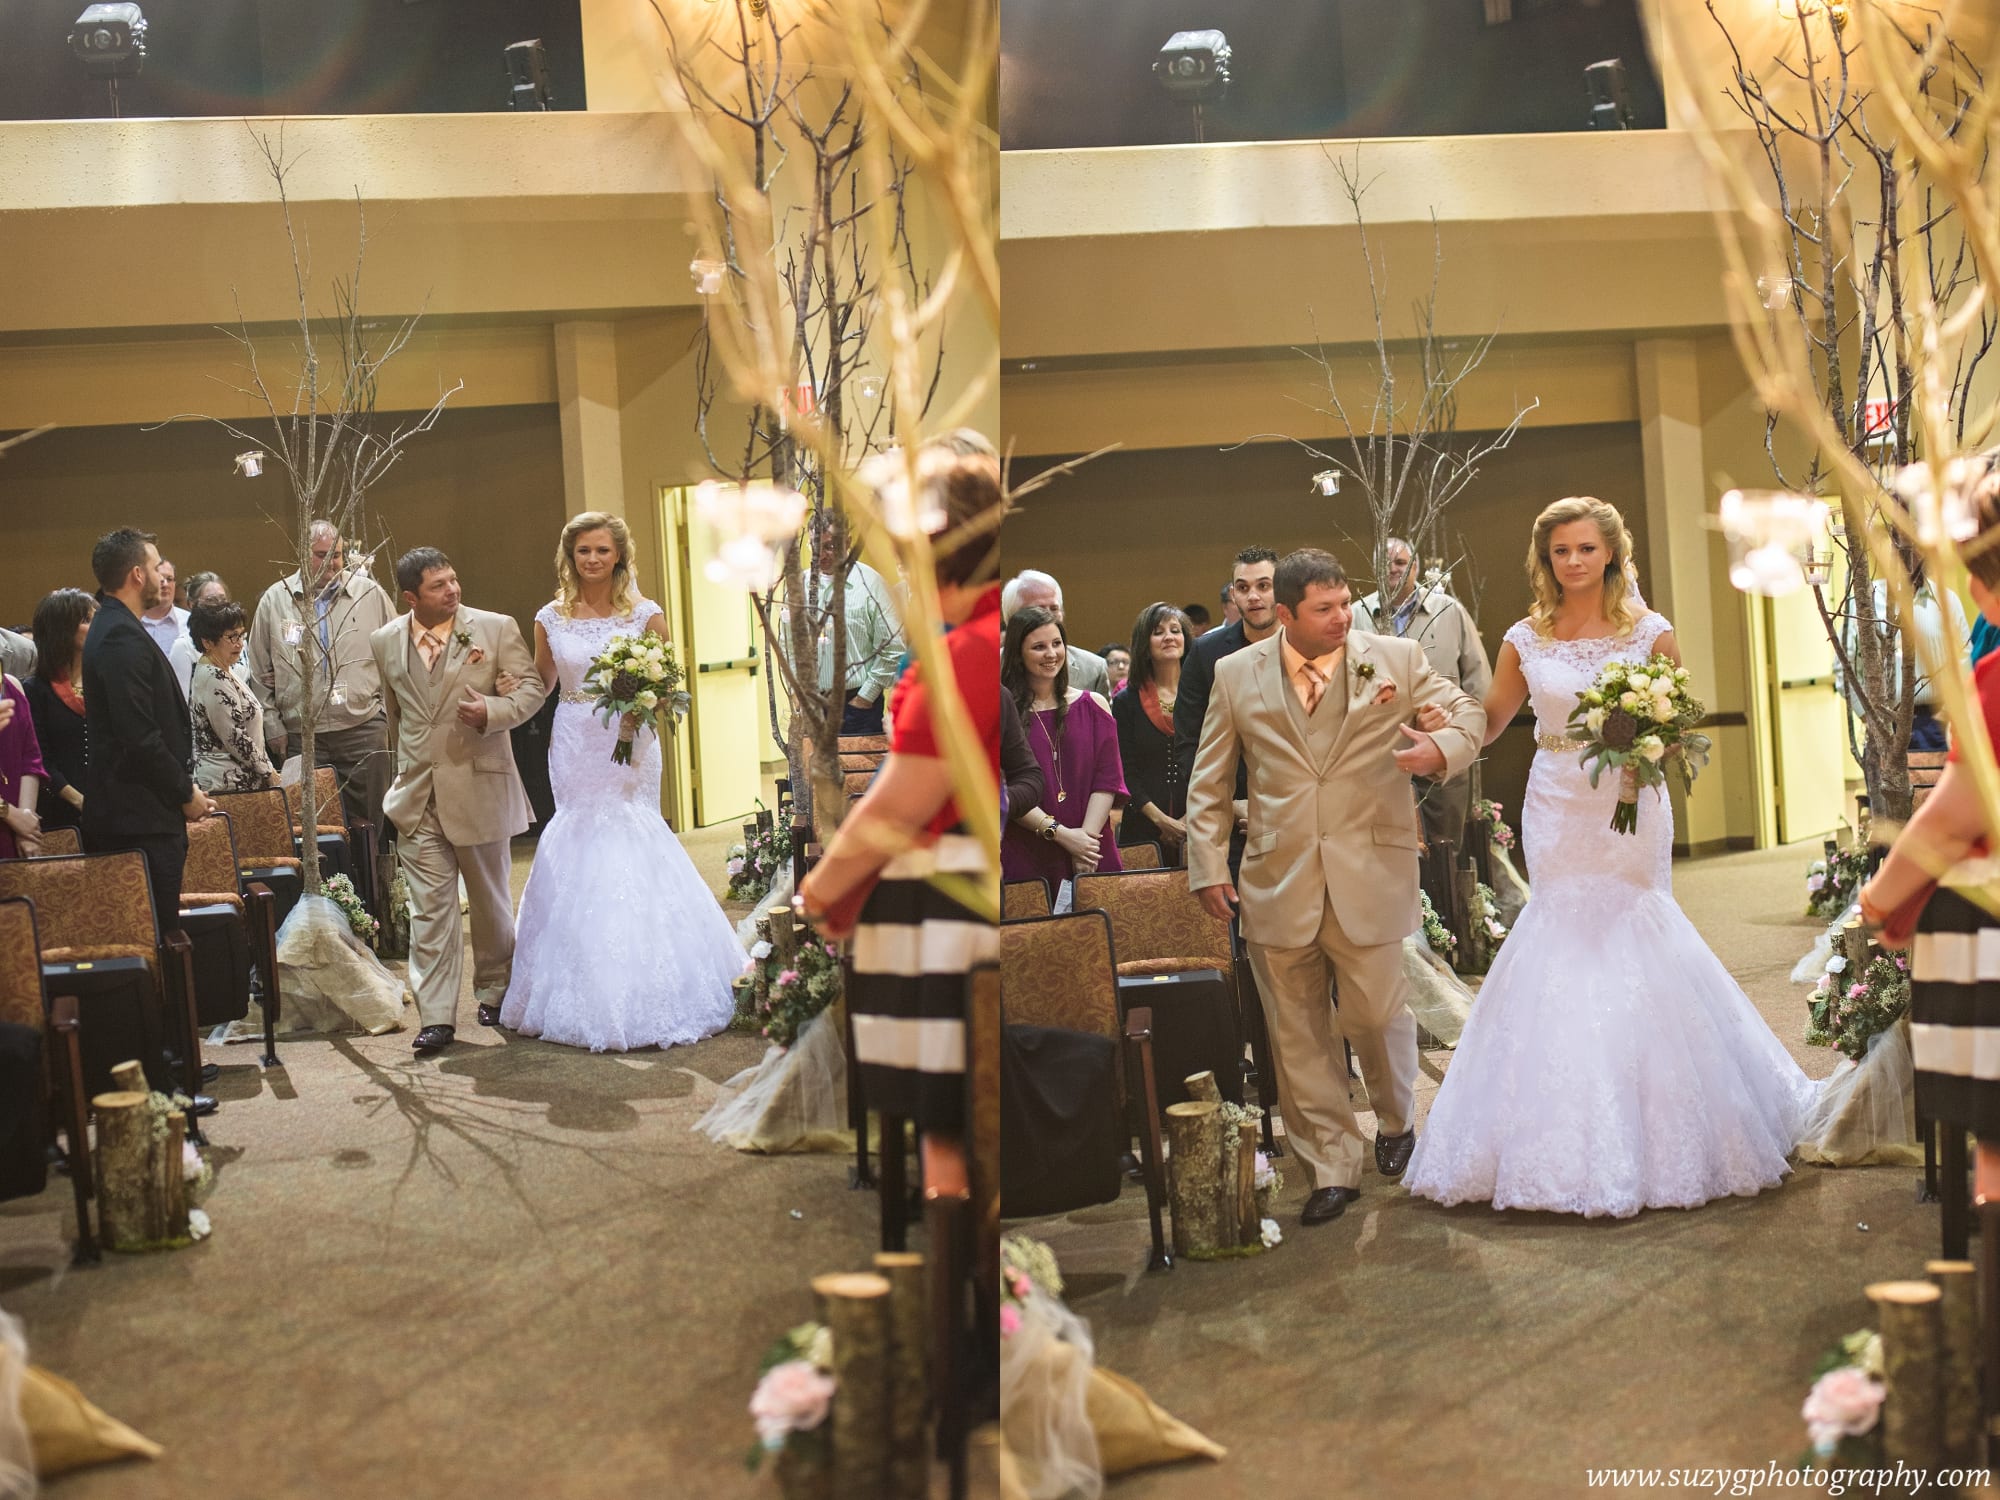 vows by victoria-lake charles-wedding-photography-suzy g-photography-suzygphotography_0038